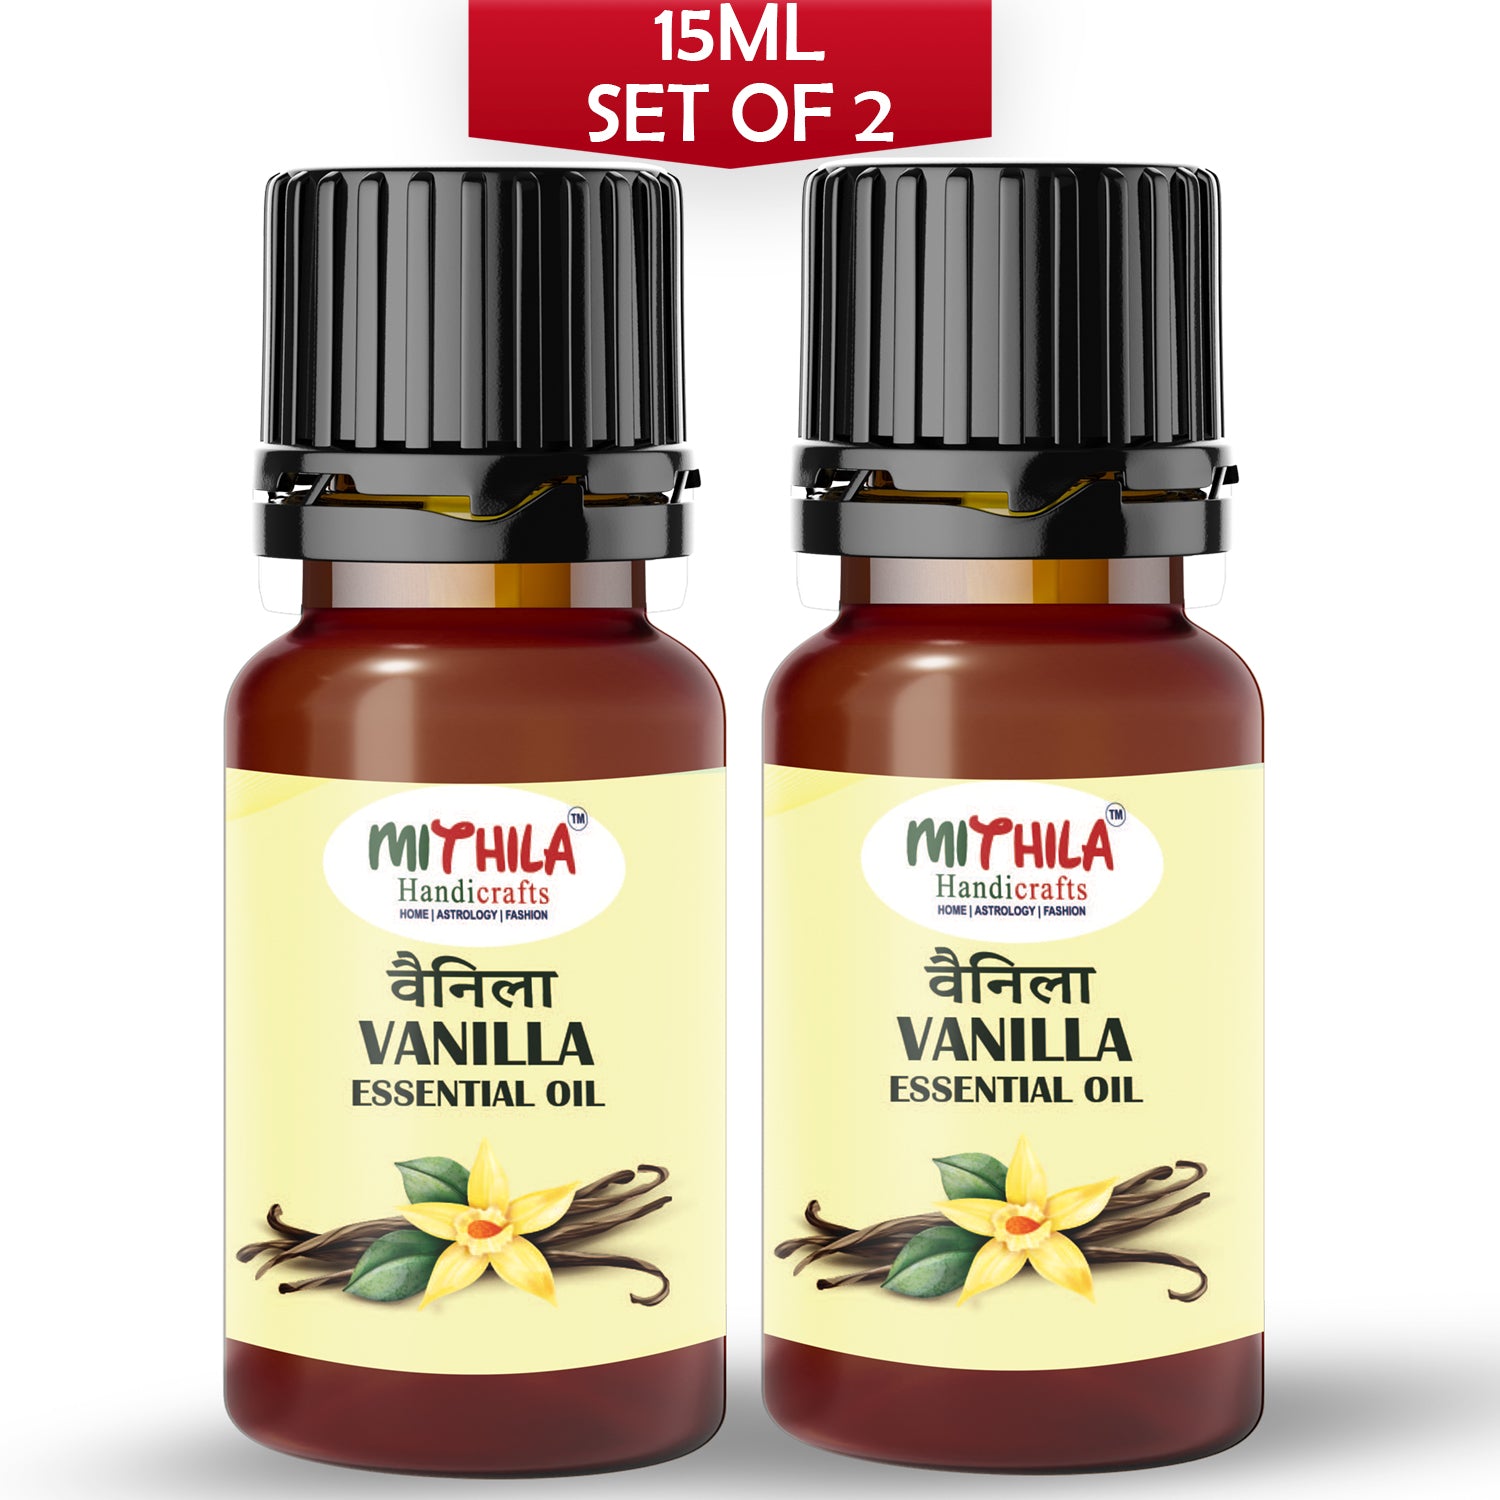 Vanilla Essential Oil For Skin, Hair Care, Home Fragrance, Aroma Therapy 15ml (Pack of 2)